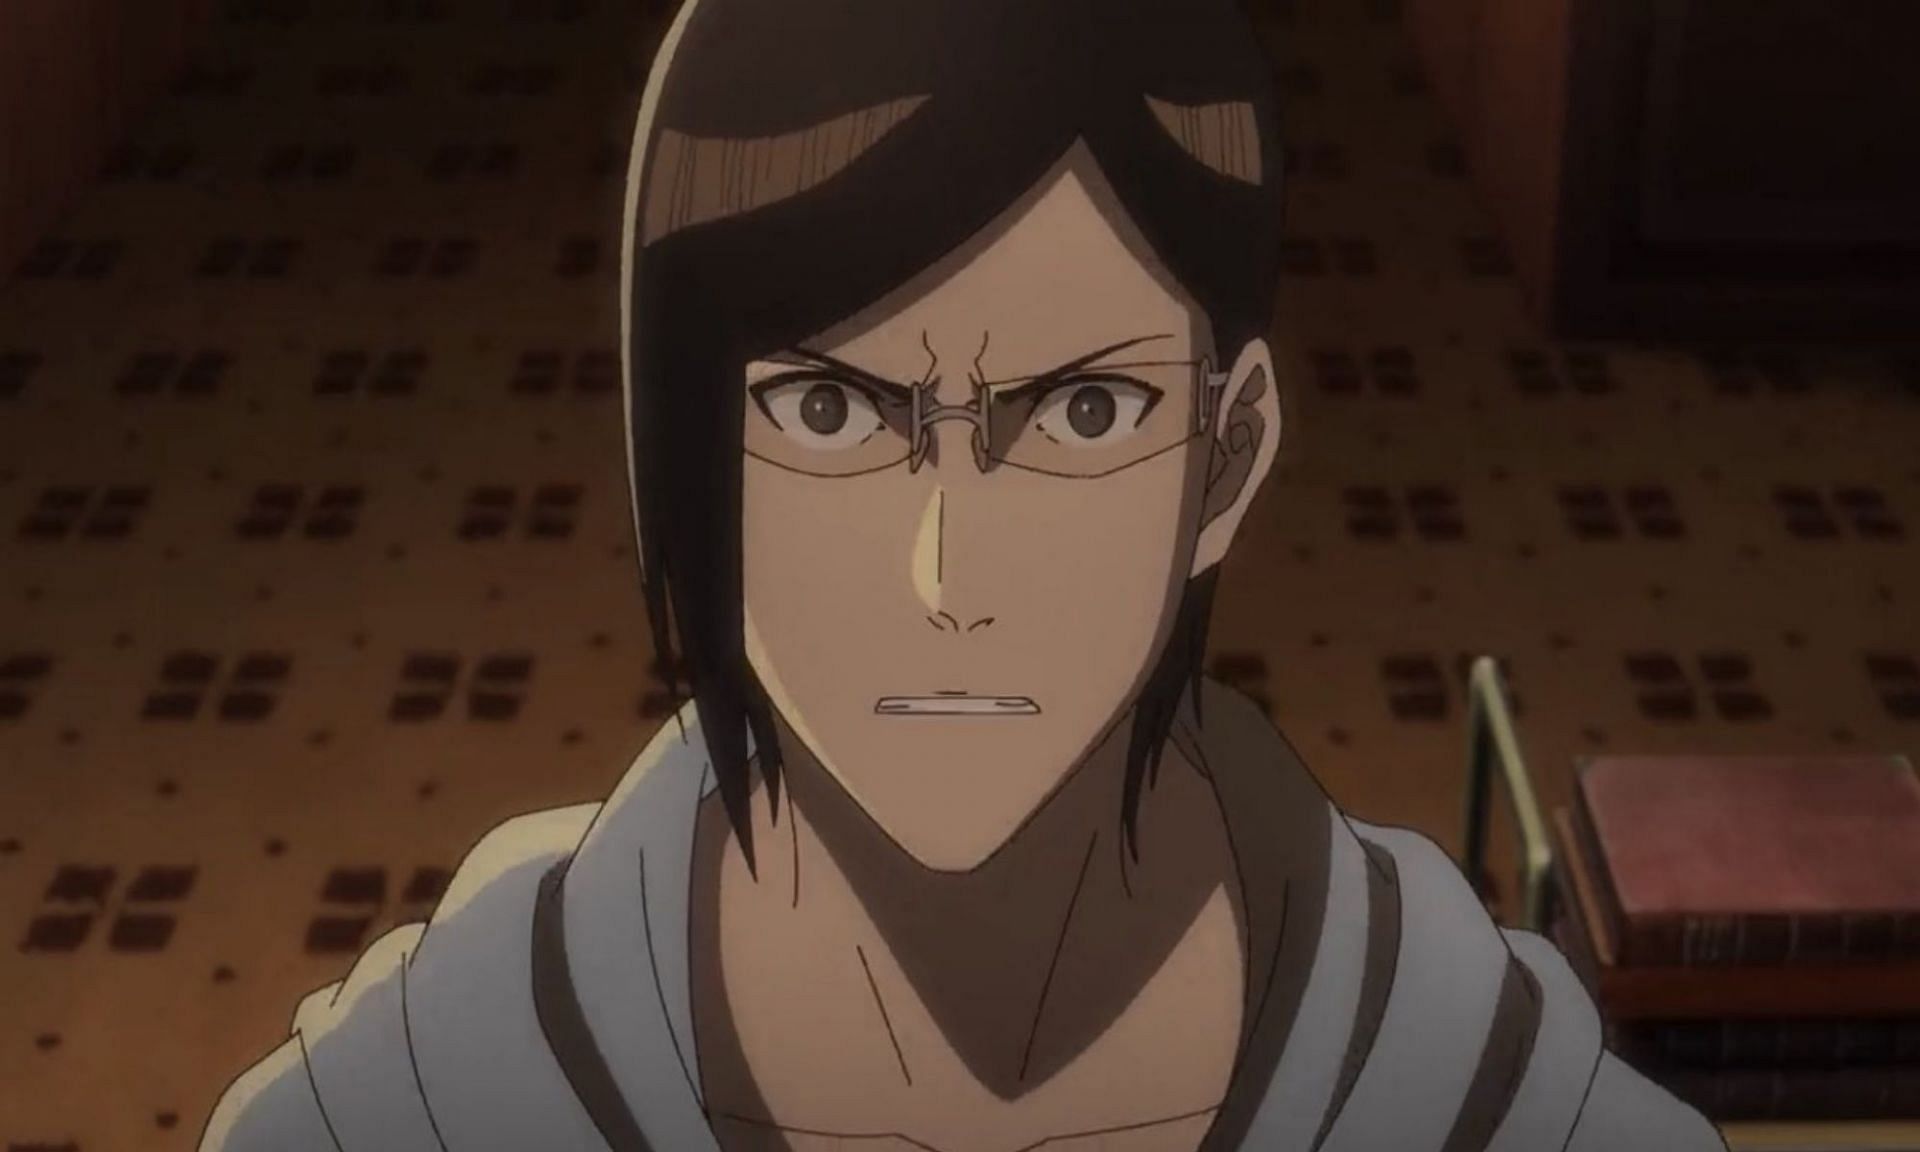 Uryu has a very complicated relationship with his father